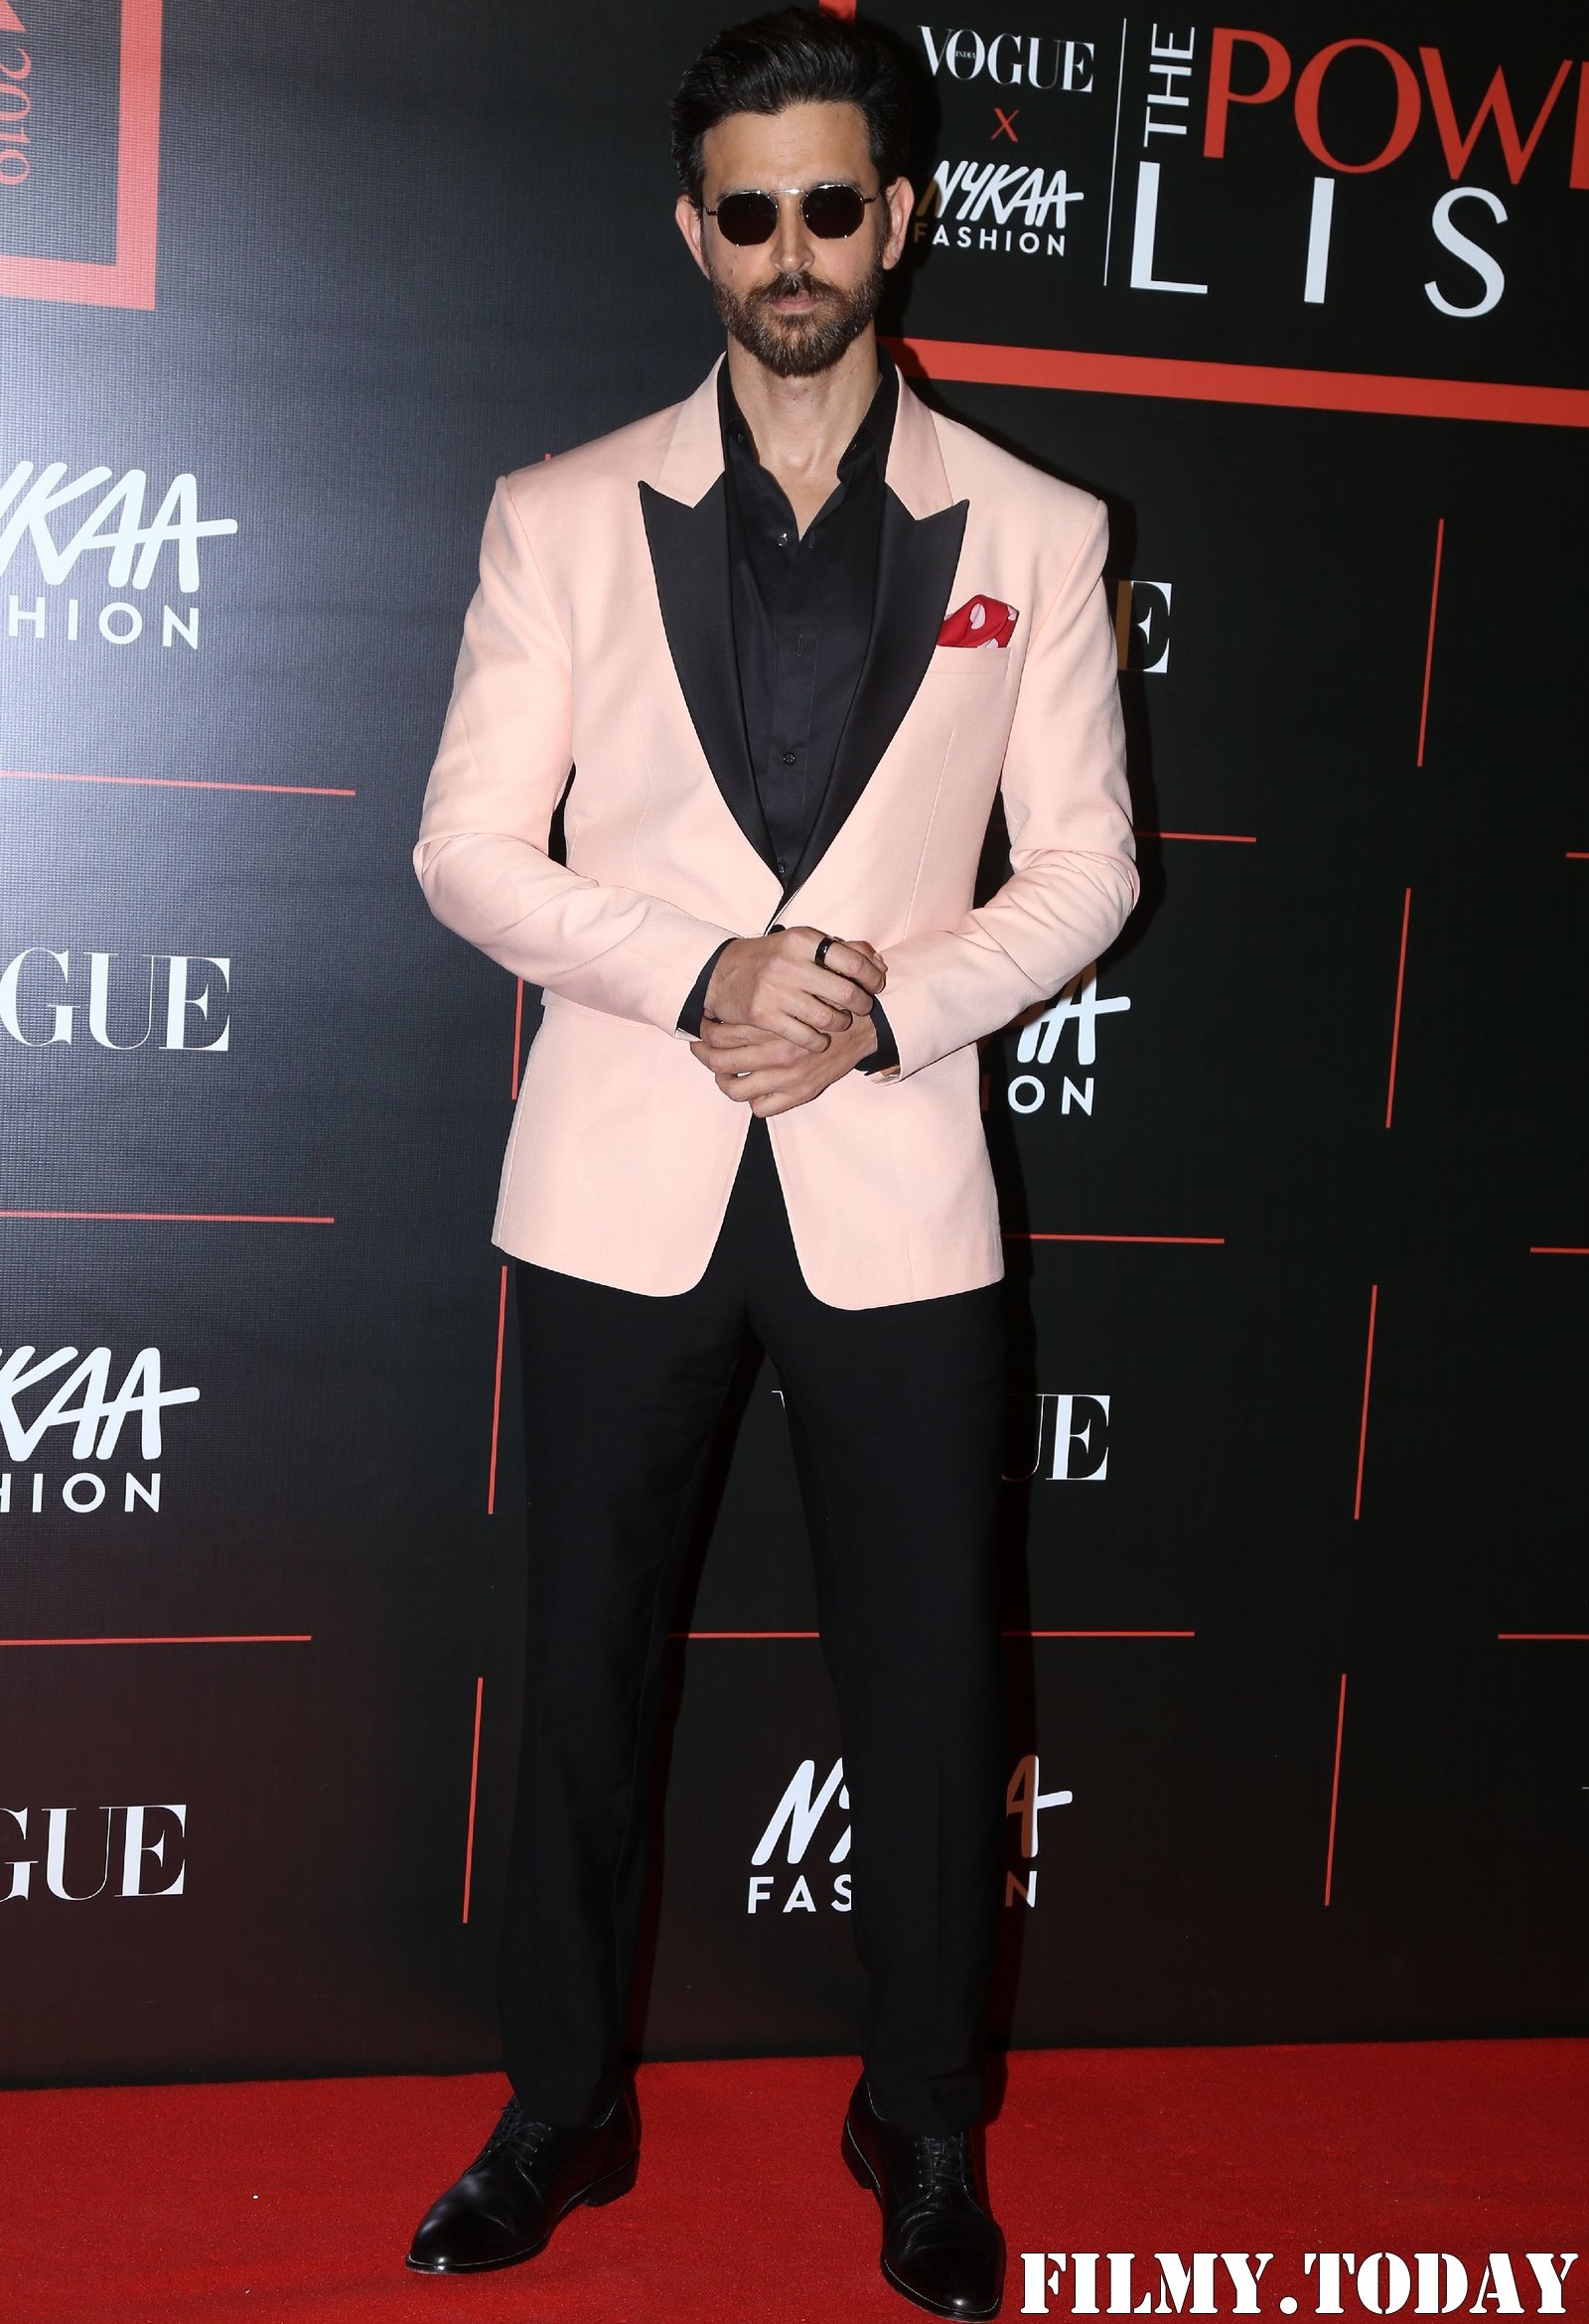 Hrithik Roshan - Photos: Celebs At Vogue The Power List 2019 At St Regis Hotel | Picture 1706334